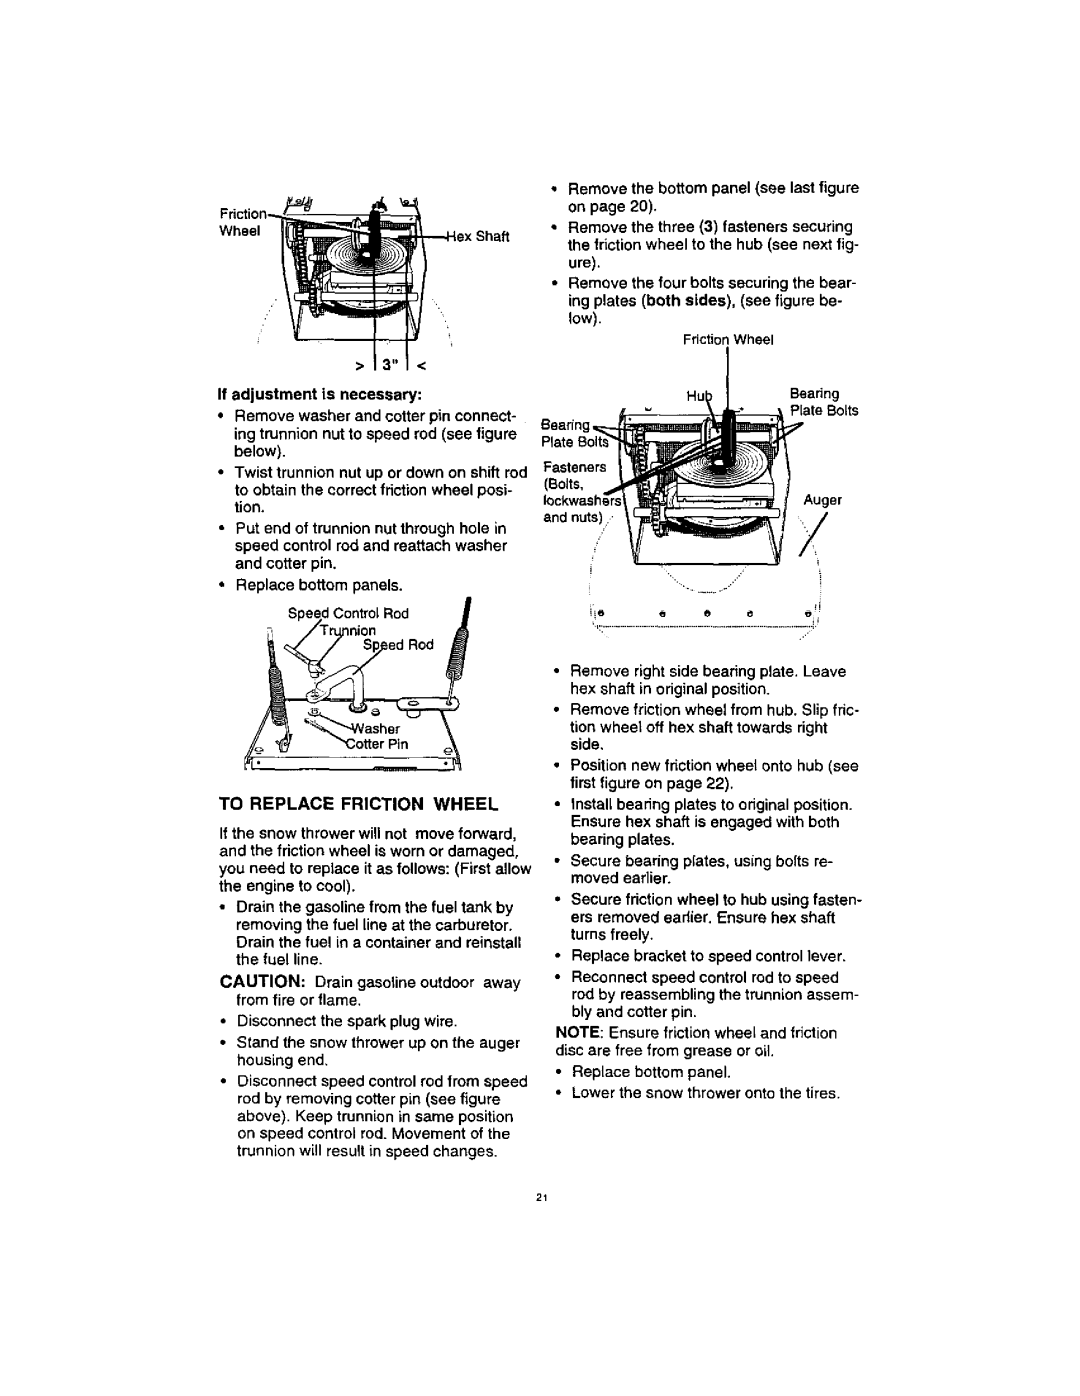 Craftsman 536.88123 operating instructions exS.e, To Replace Friction Wheel 